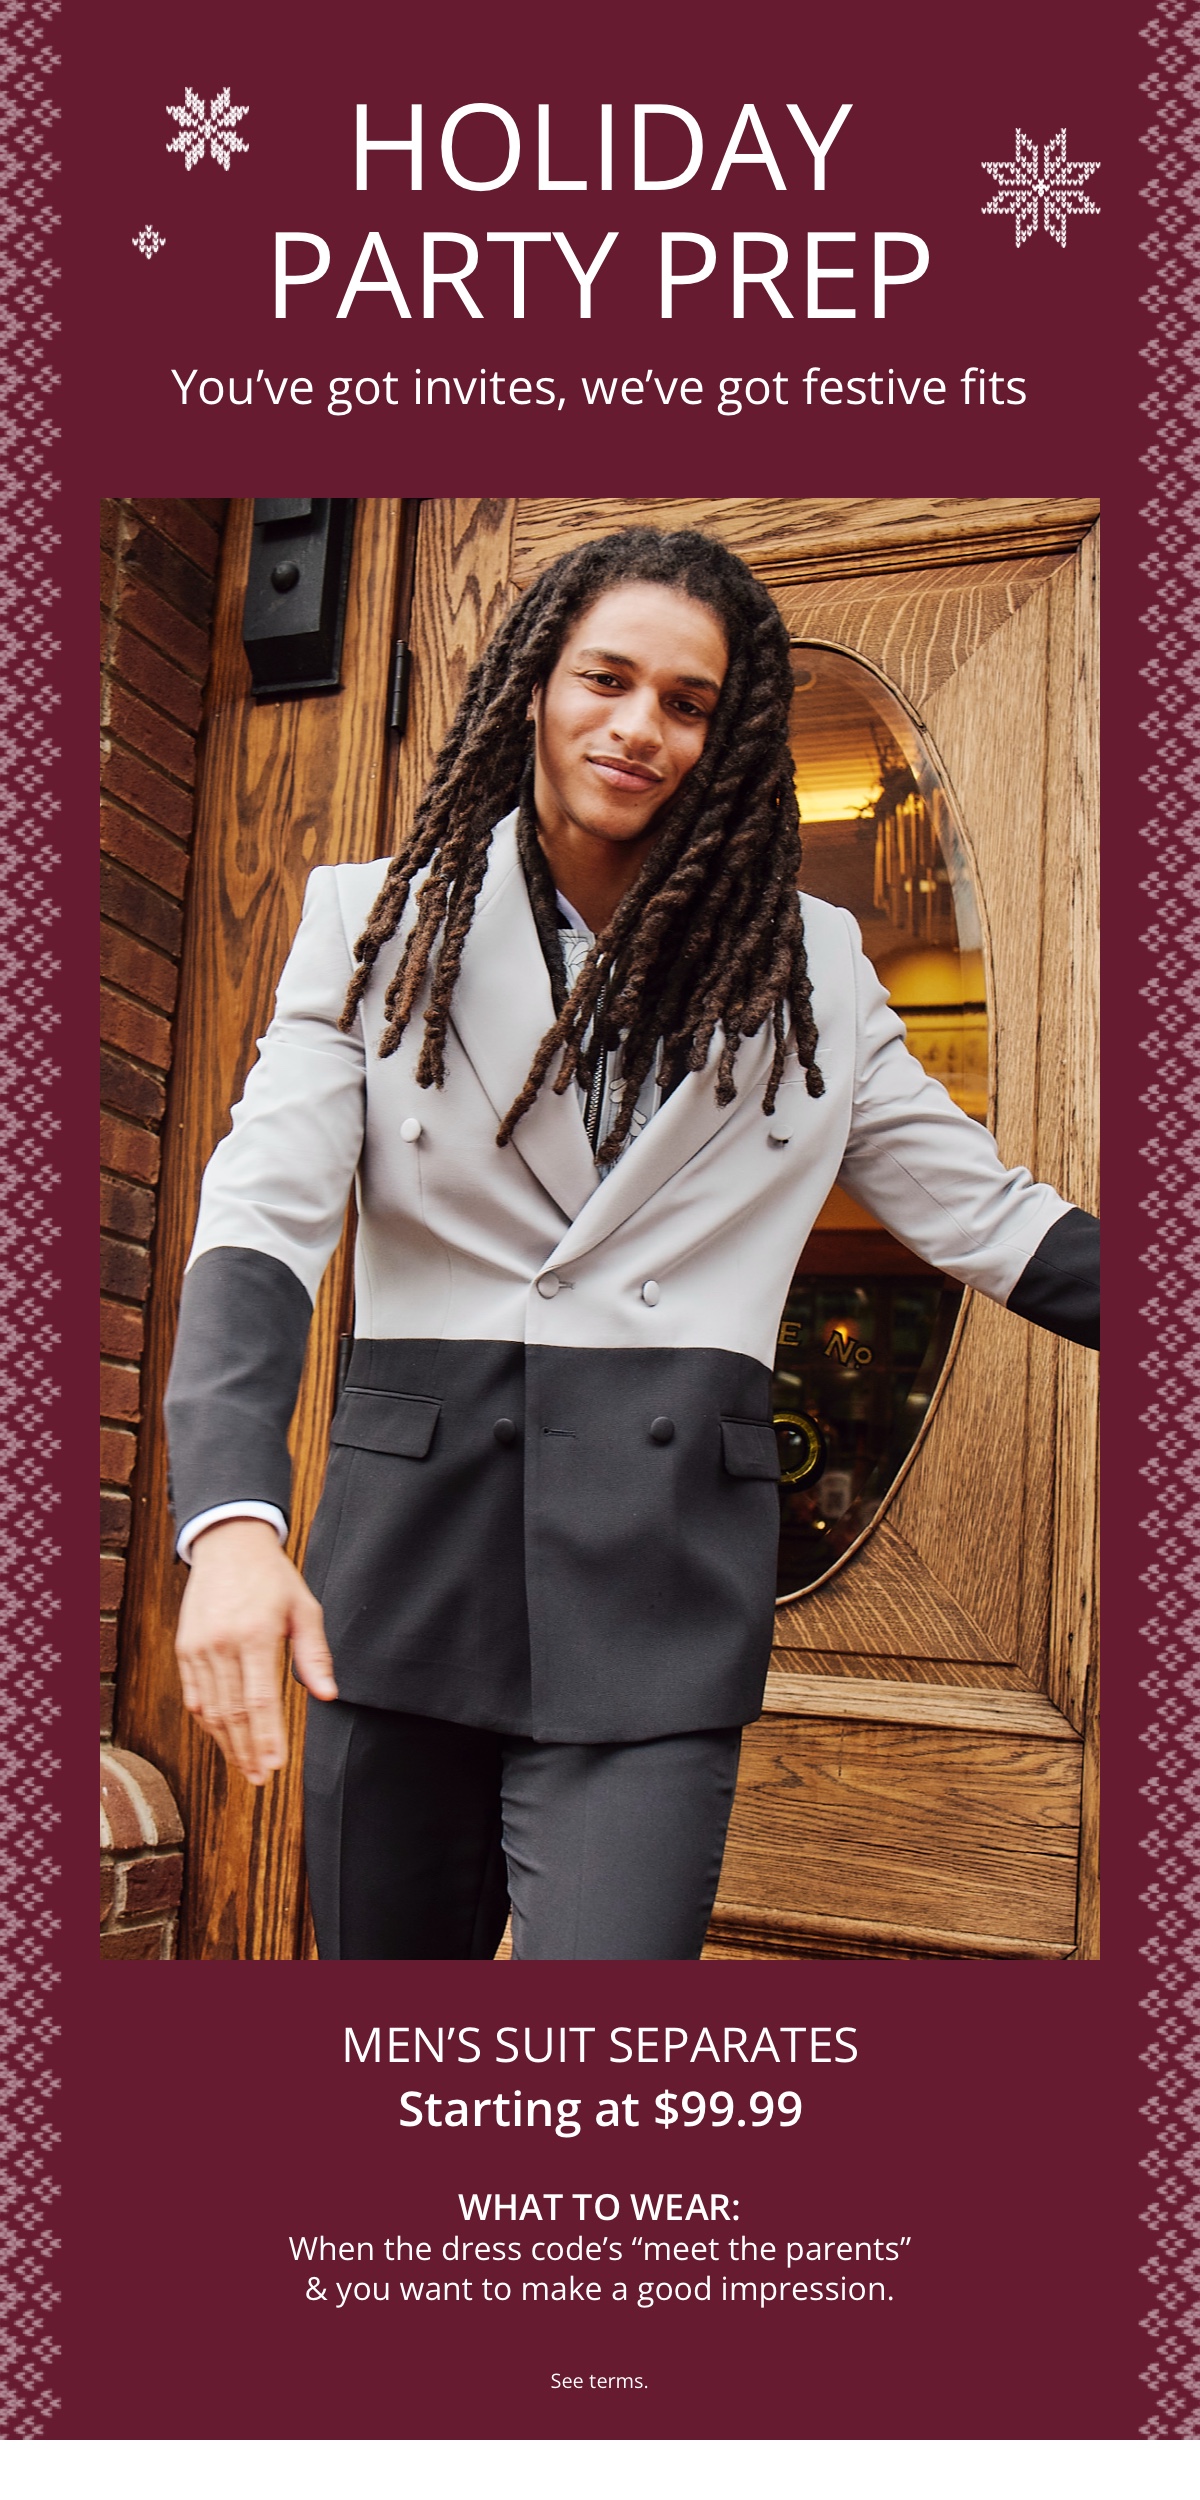 Holiday Party Prep|Youve got invites, weve got festive fits|Mens Suit Separates|Starting at $99.99|What to Wear:|When the dress codes meet the parents and you want to make a good impression.|See terms.